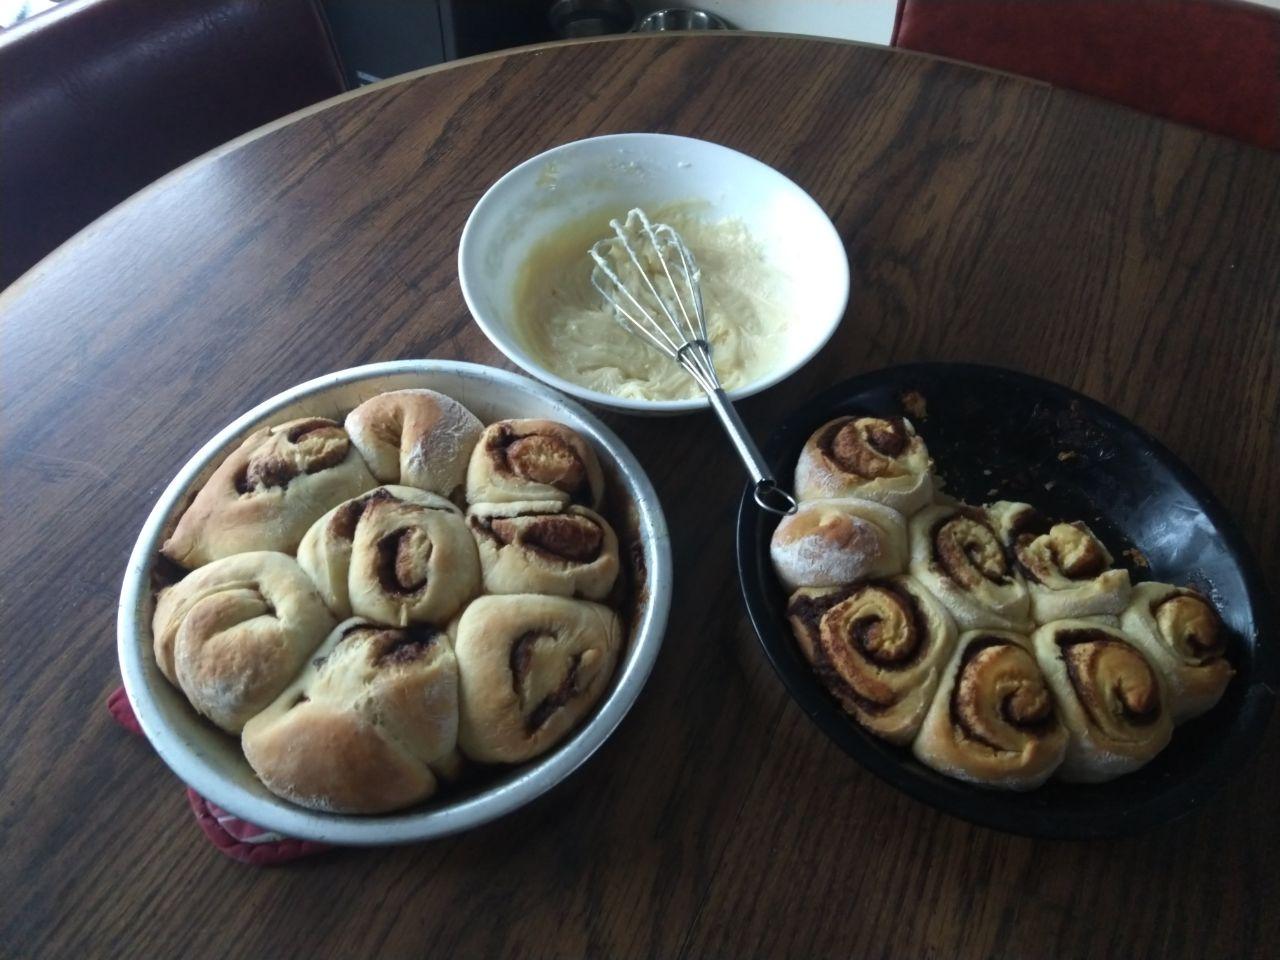 Cinnamon rolls in pie tins next to a bowl of frosting.